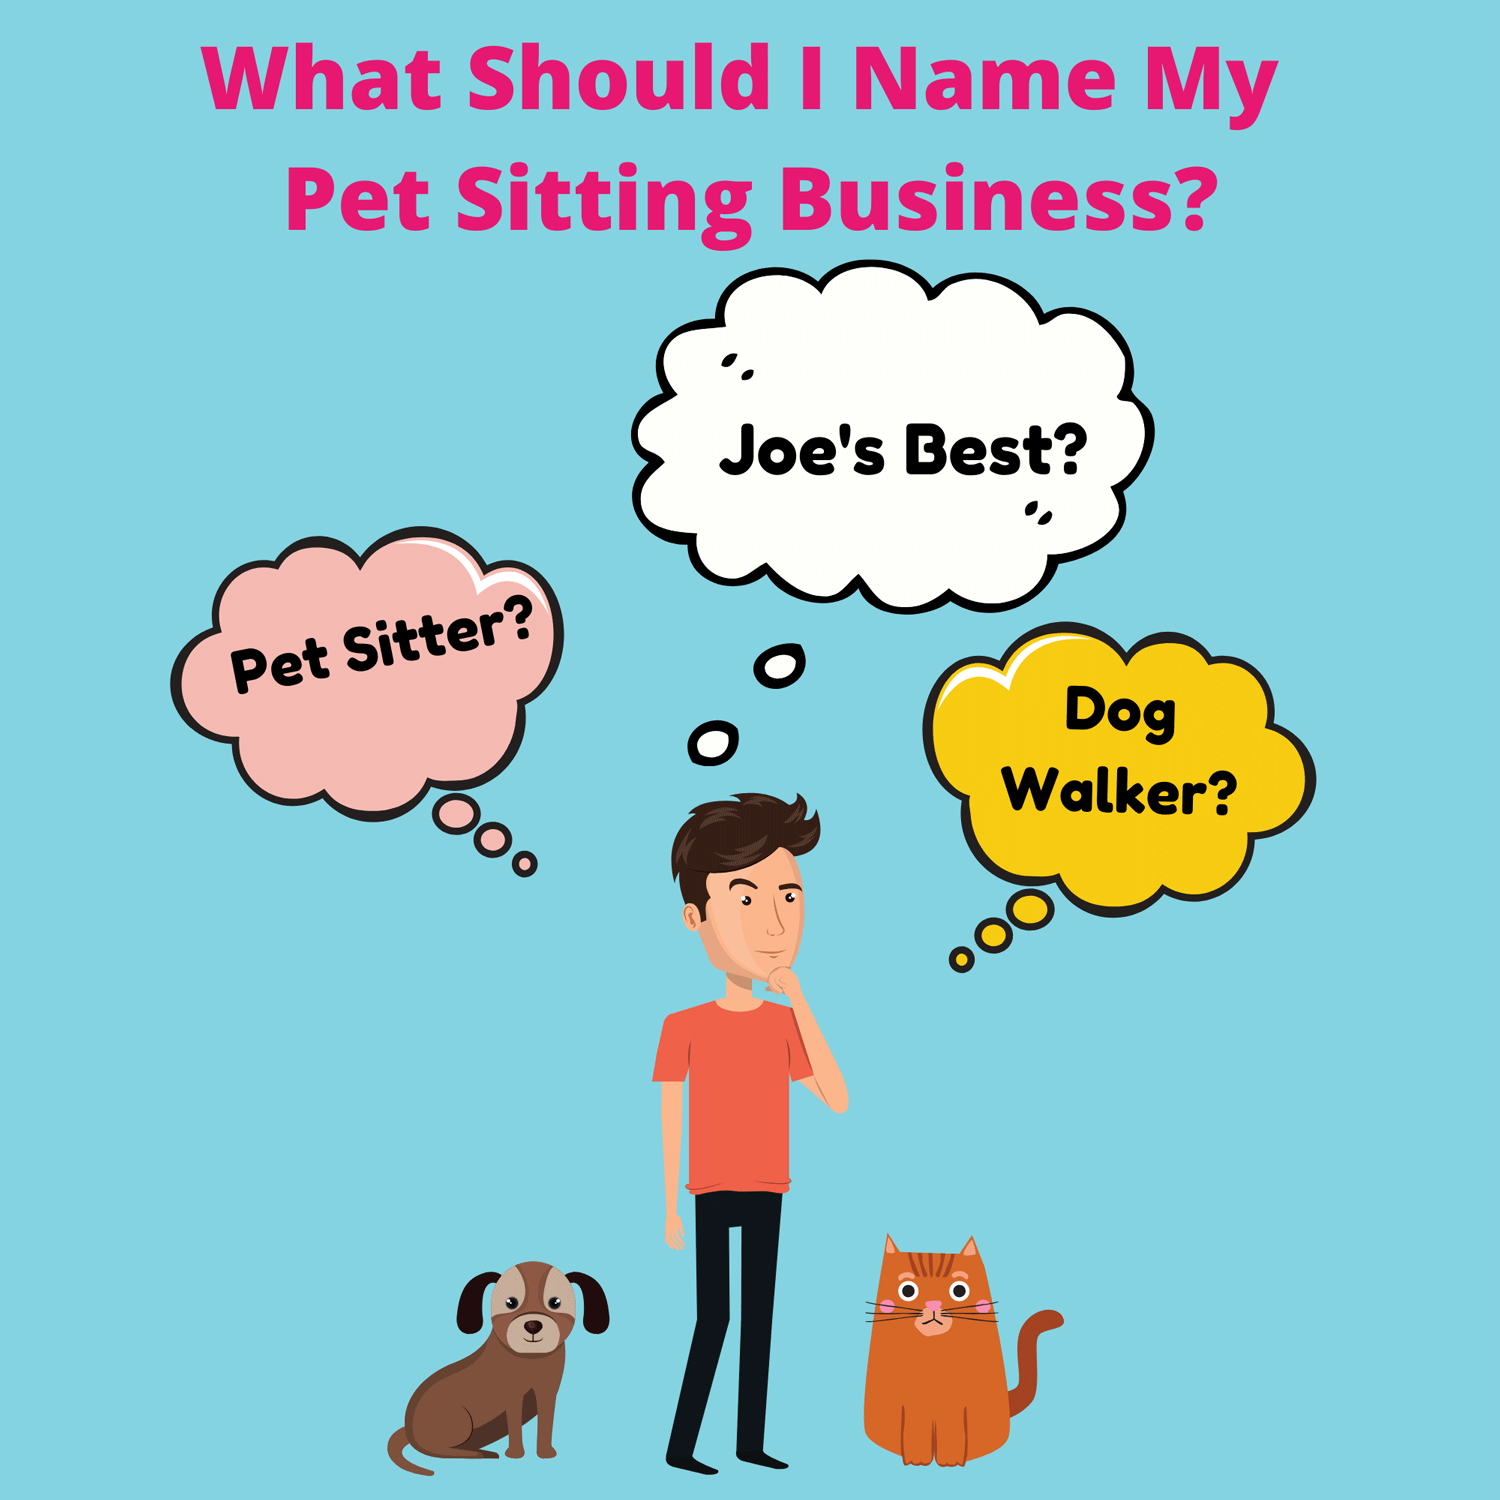 What Should I name My Pet Sitting Business